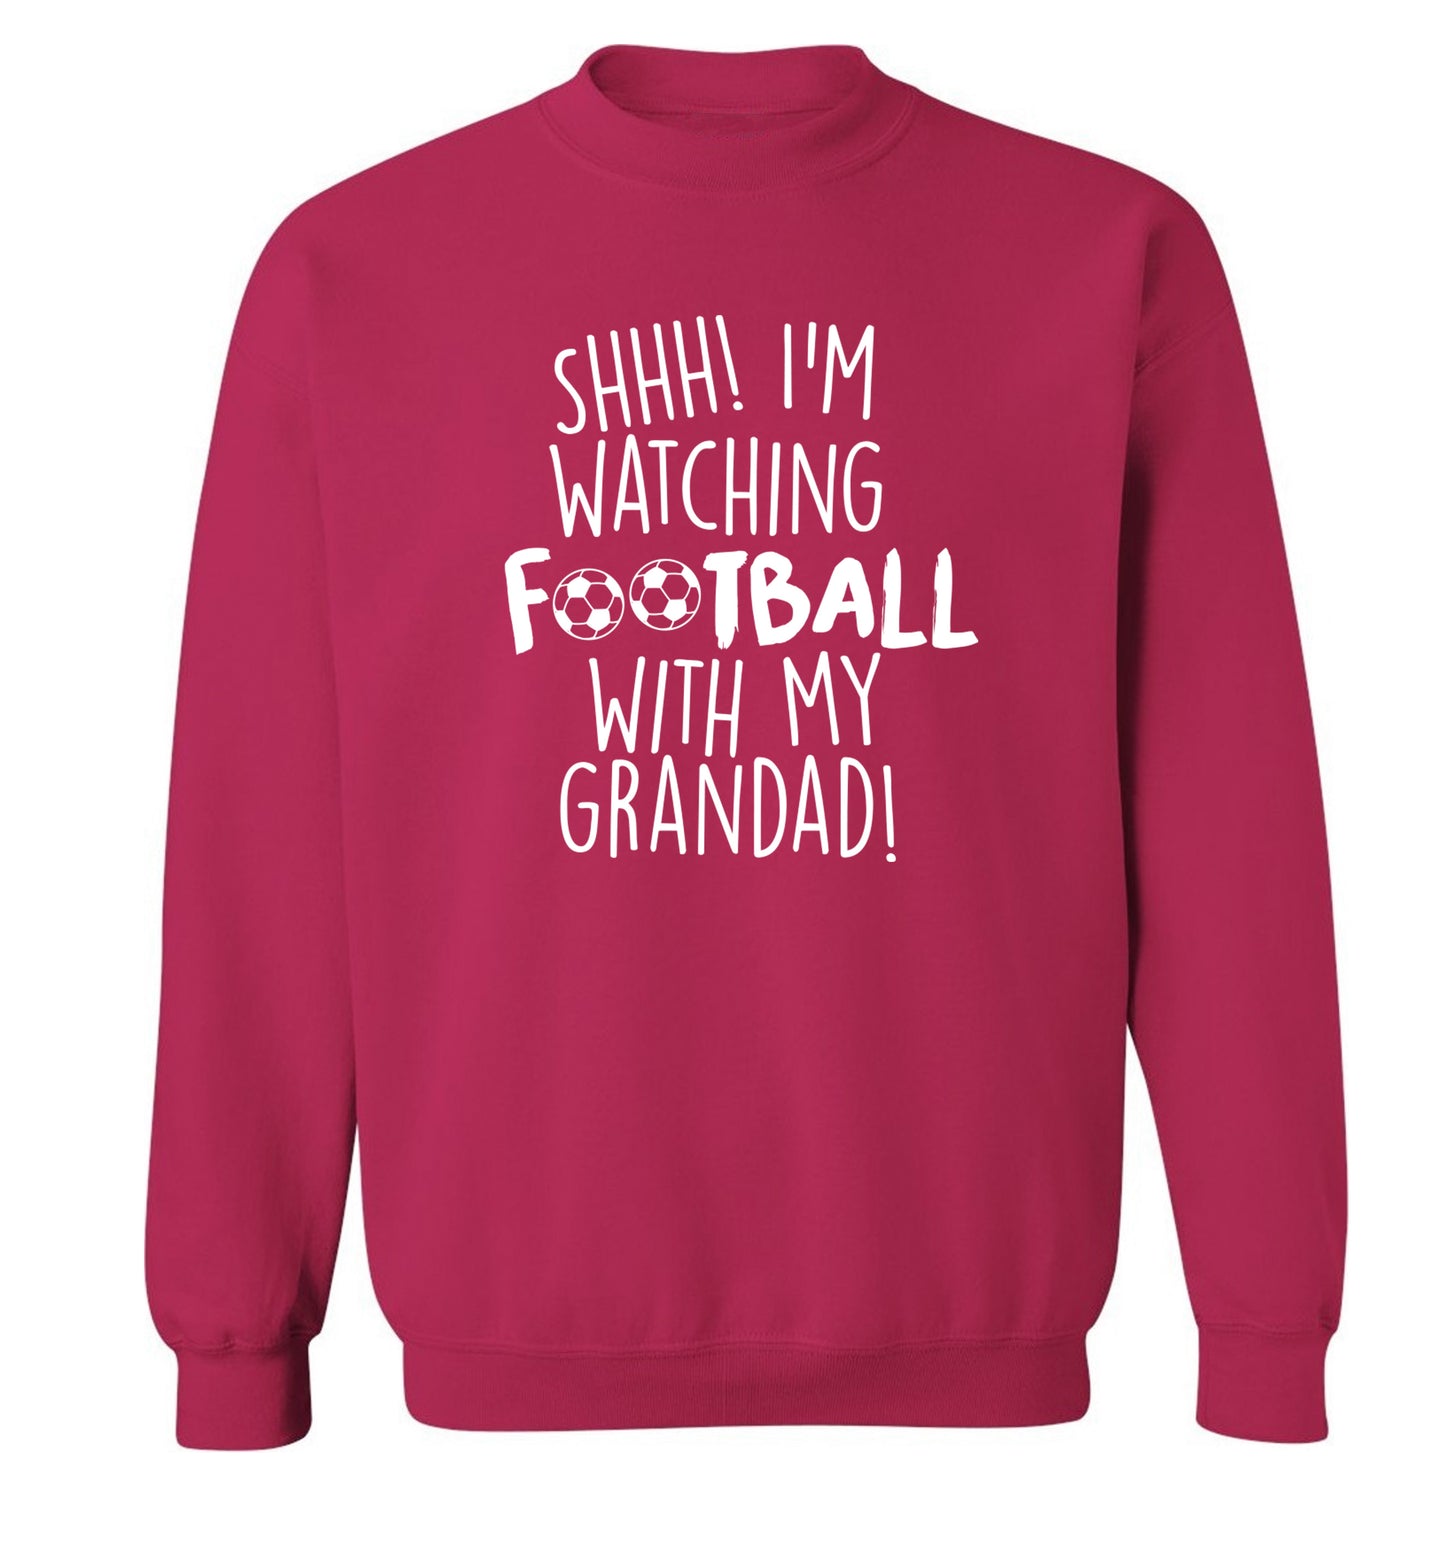 Shhh I'm watching football with my grandad Adult's unisexpink Sweater 2XL